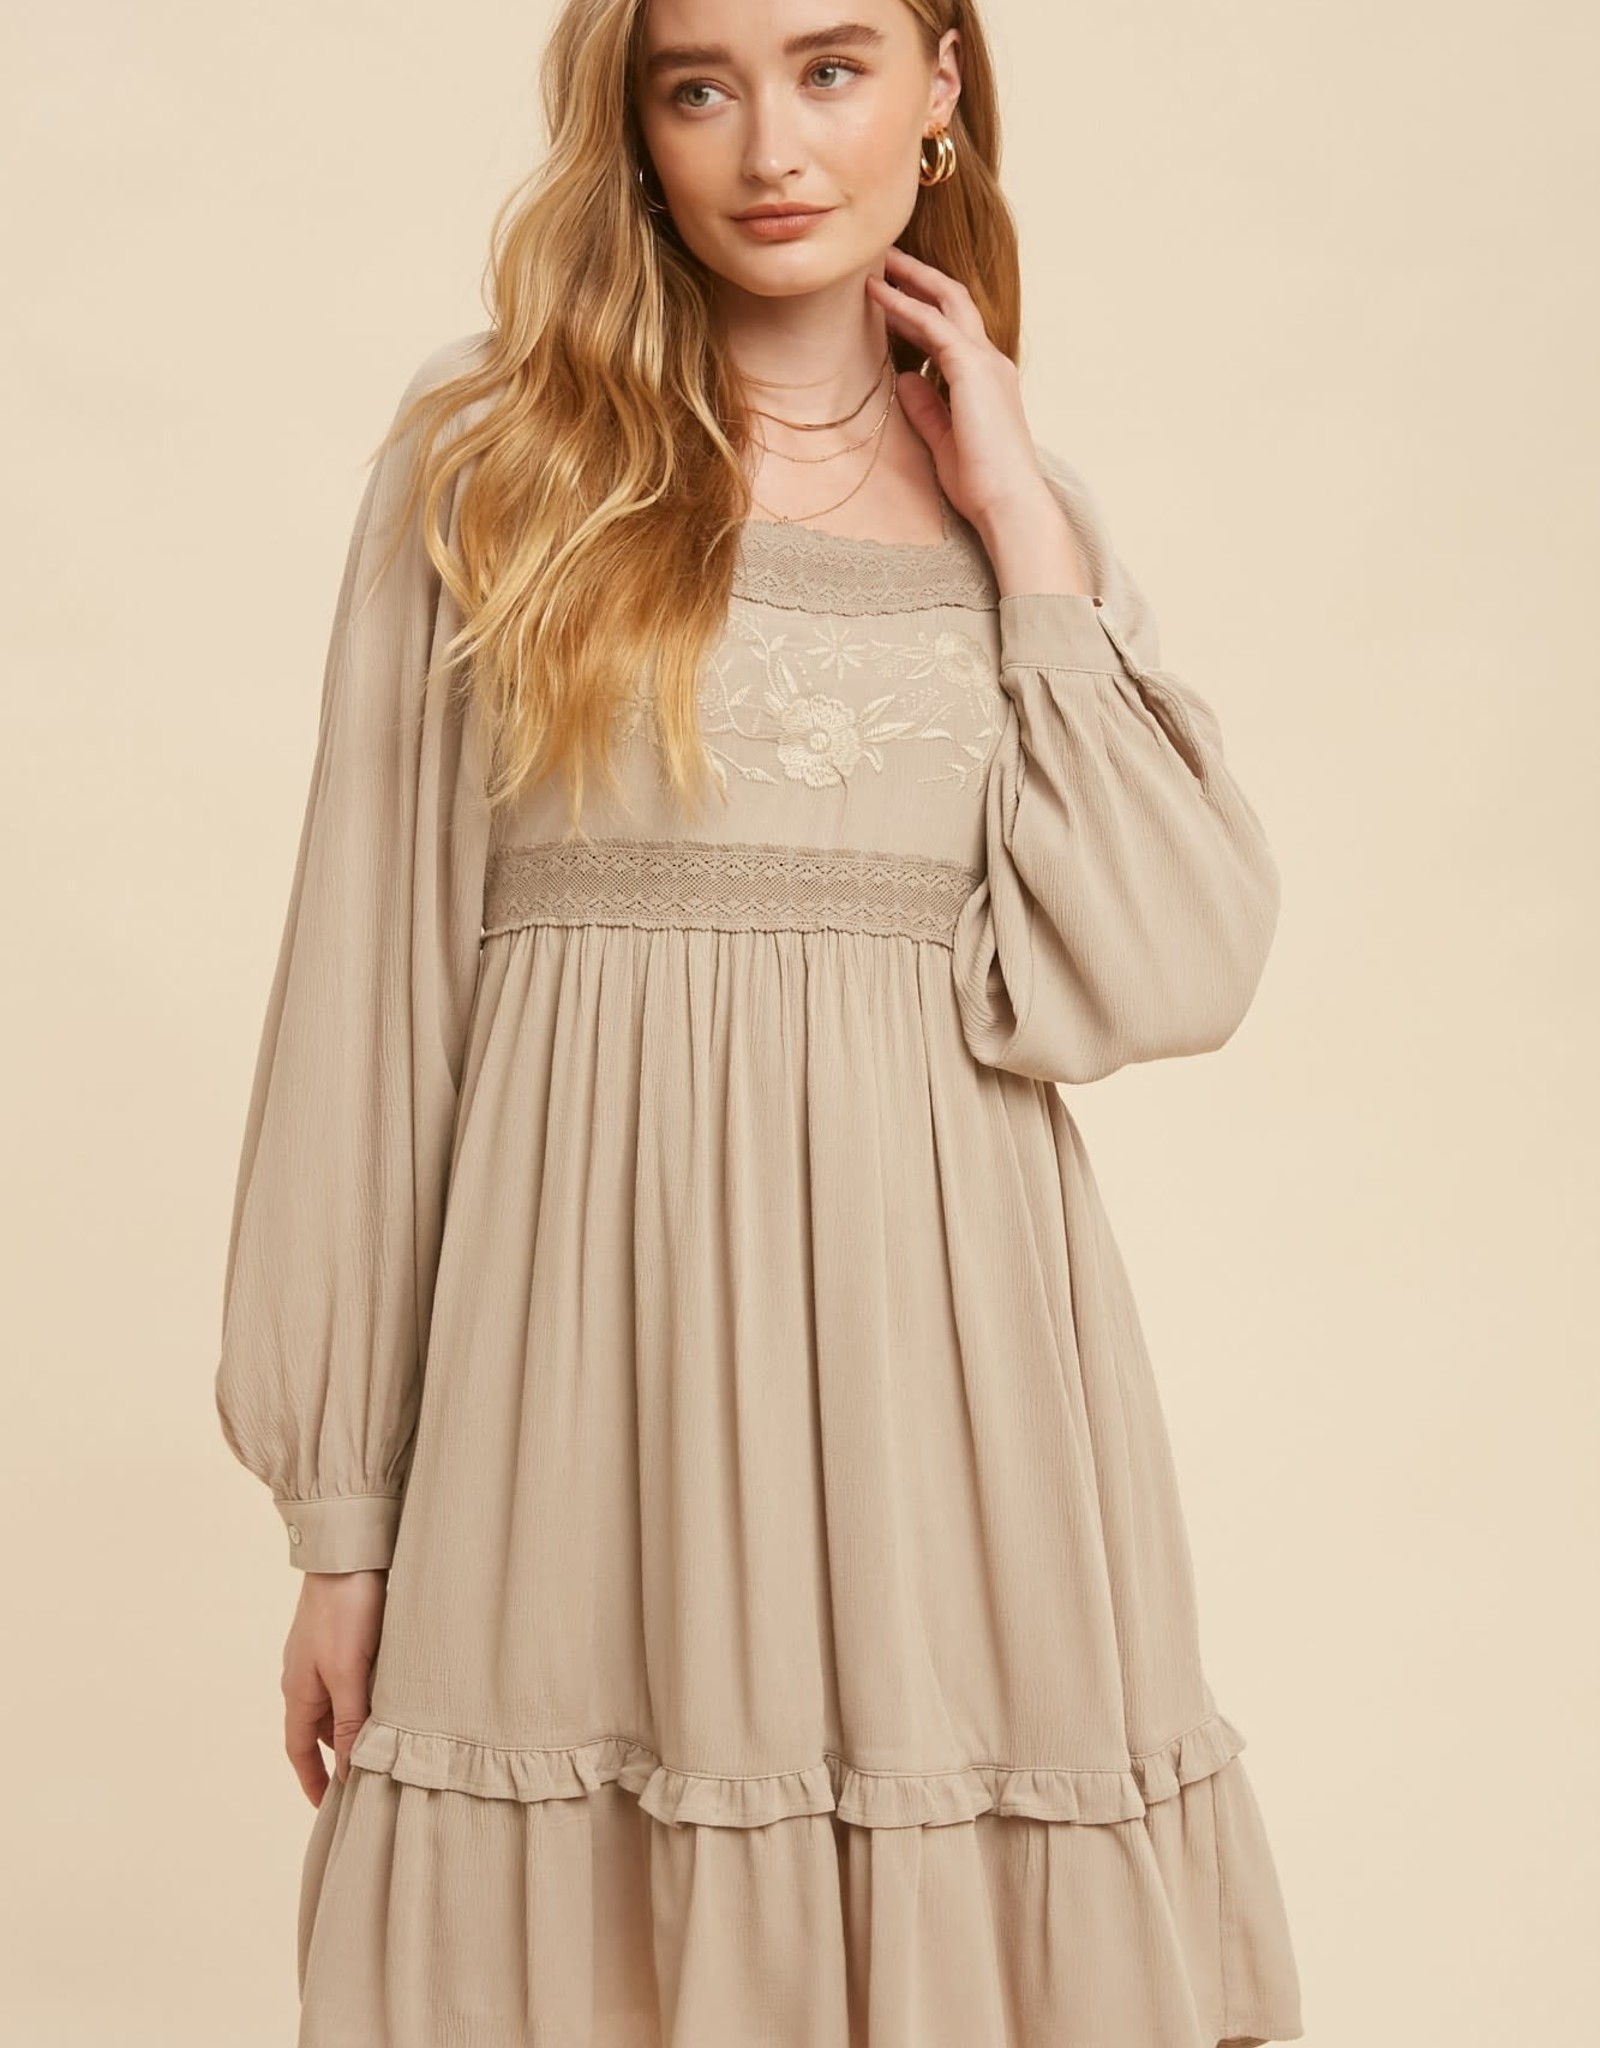 Miss Bliss LS Embroidered Square Neck Mini Dress- Light Taupe